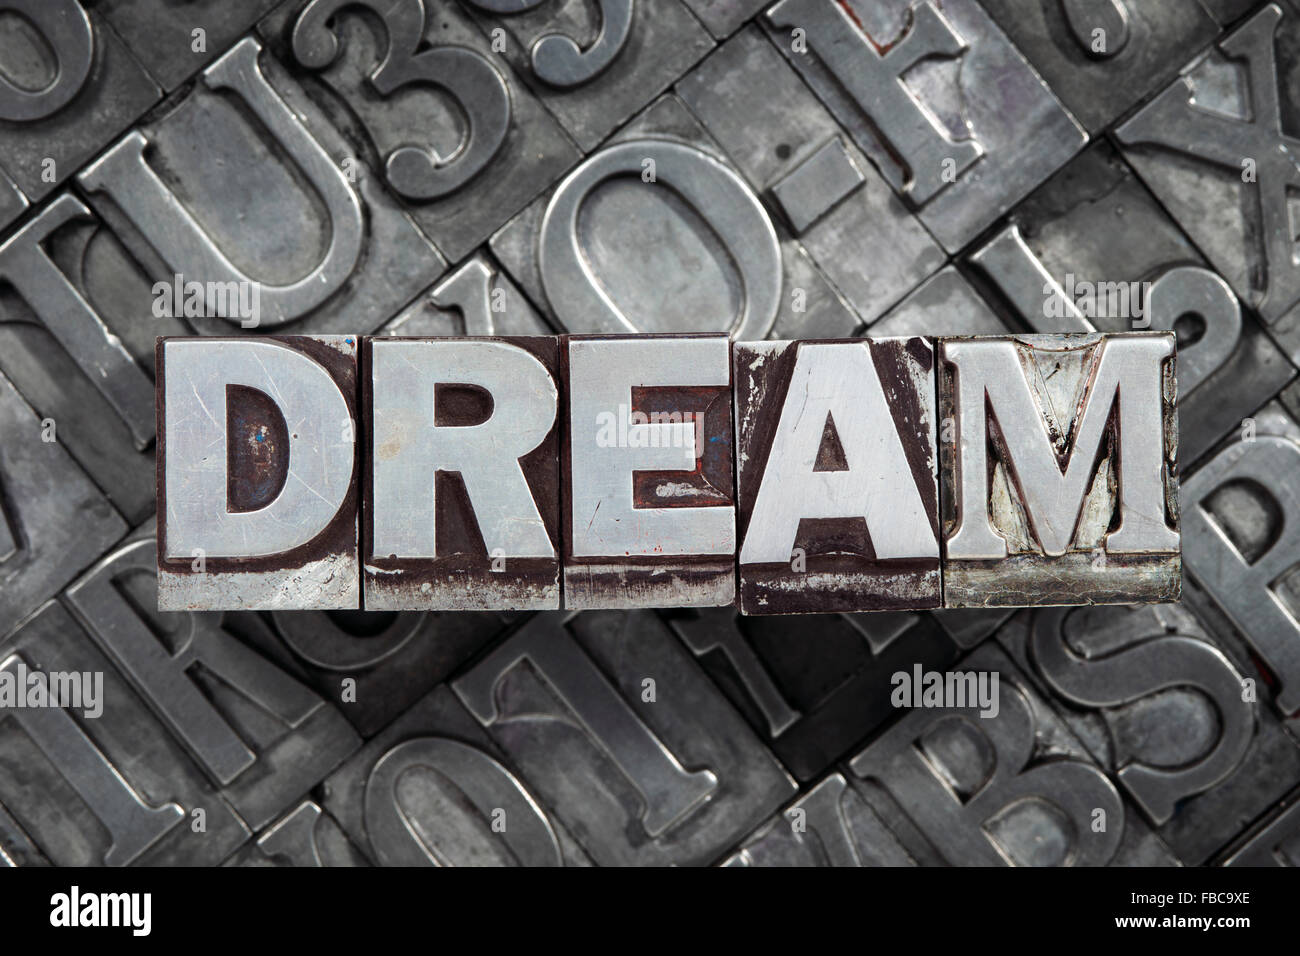 dream word concept made from metallic letterpress blocks on many letters background Stock Photo